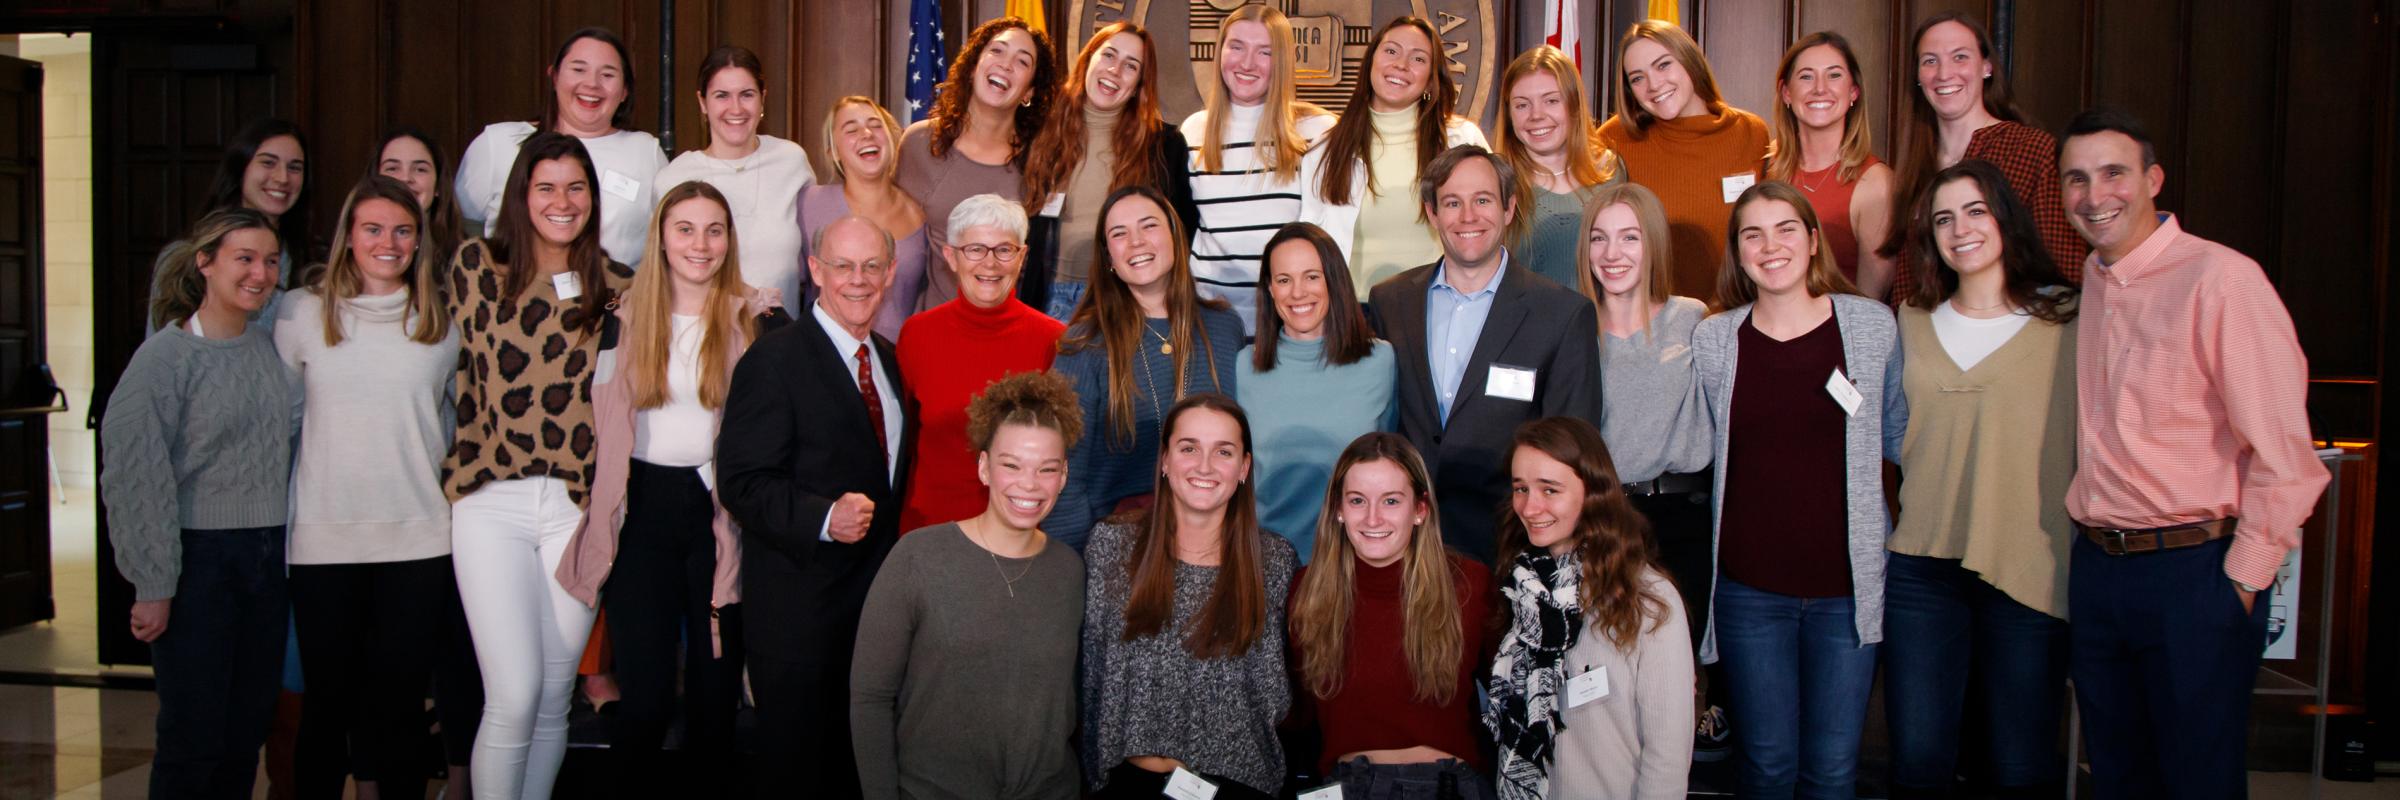 Bridget Power with the Roberts family and women's basketball team